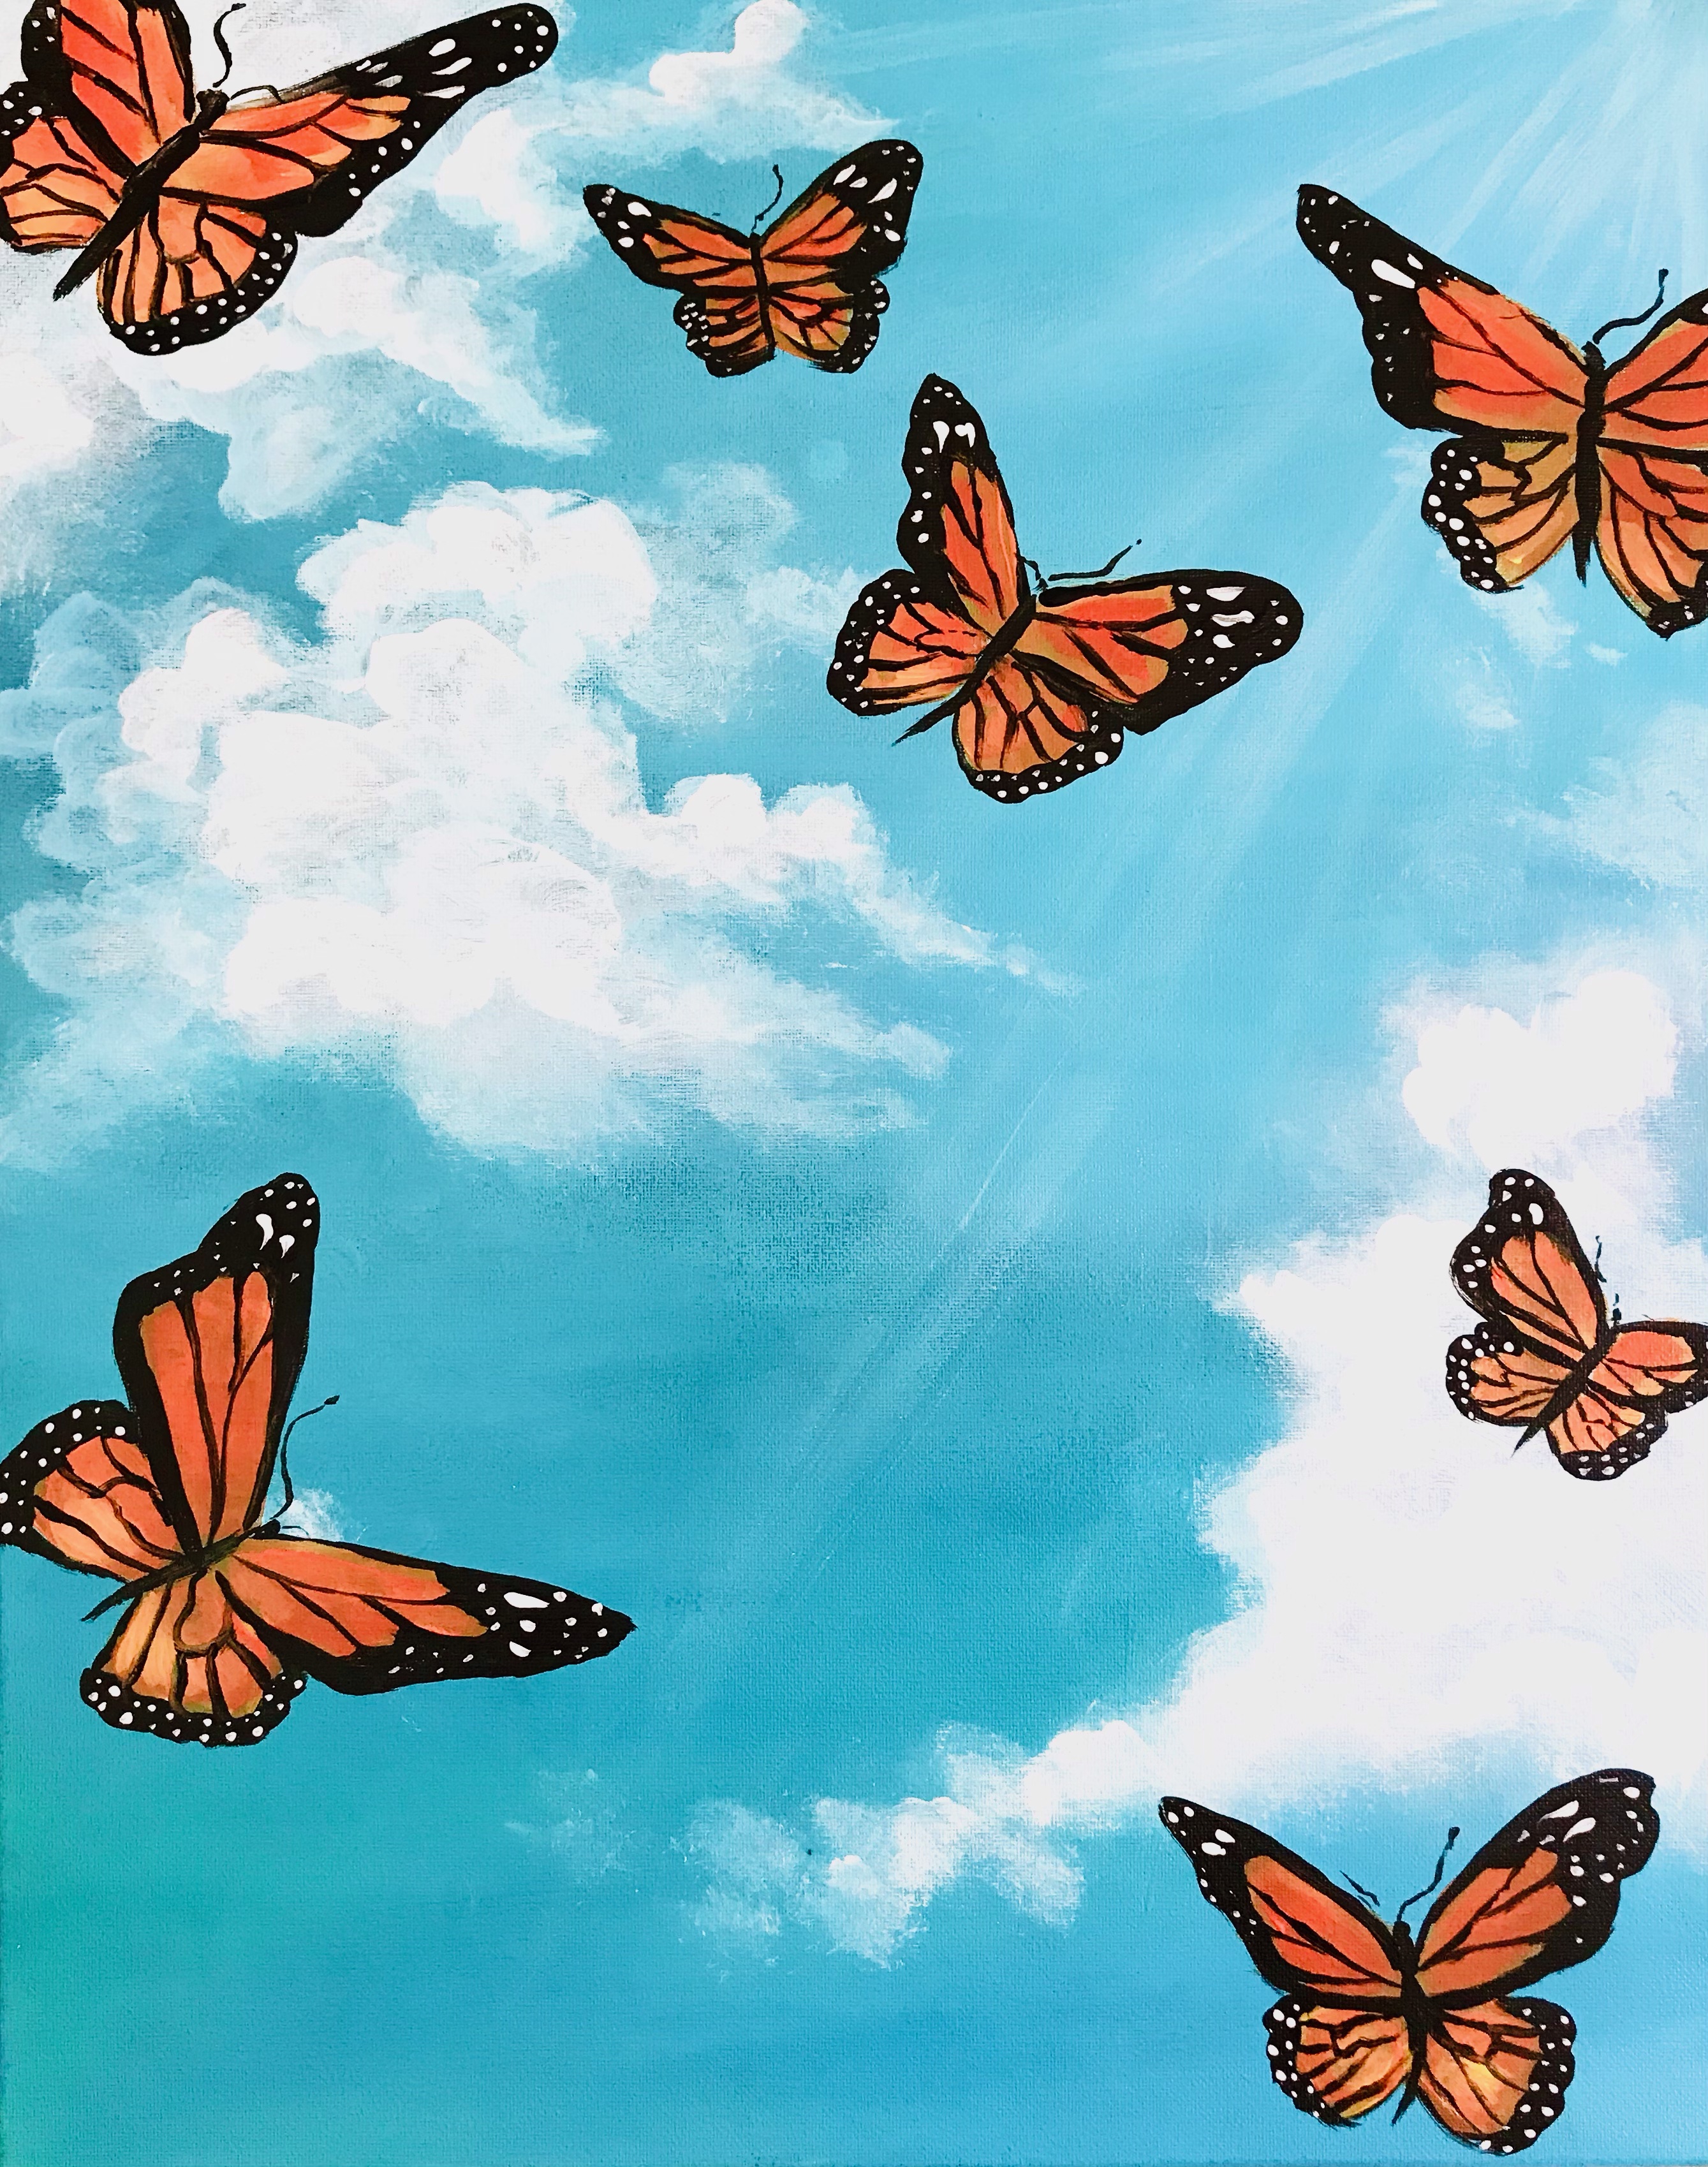 A Butterflies in the Sky experience project by Yaymaker